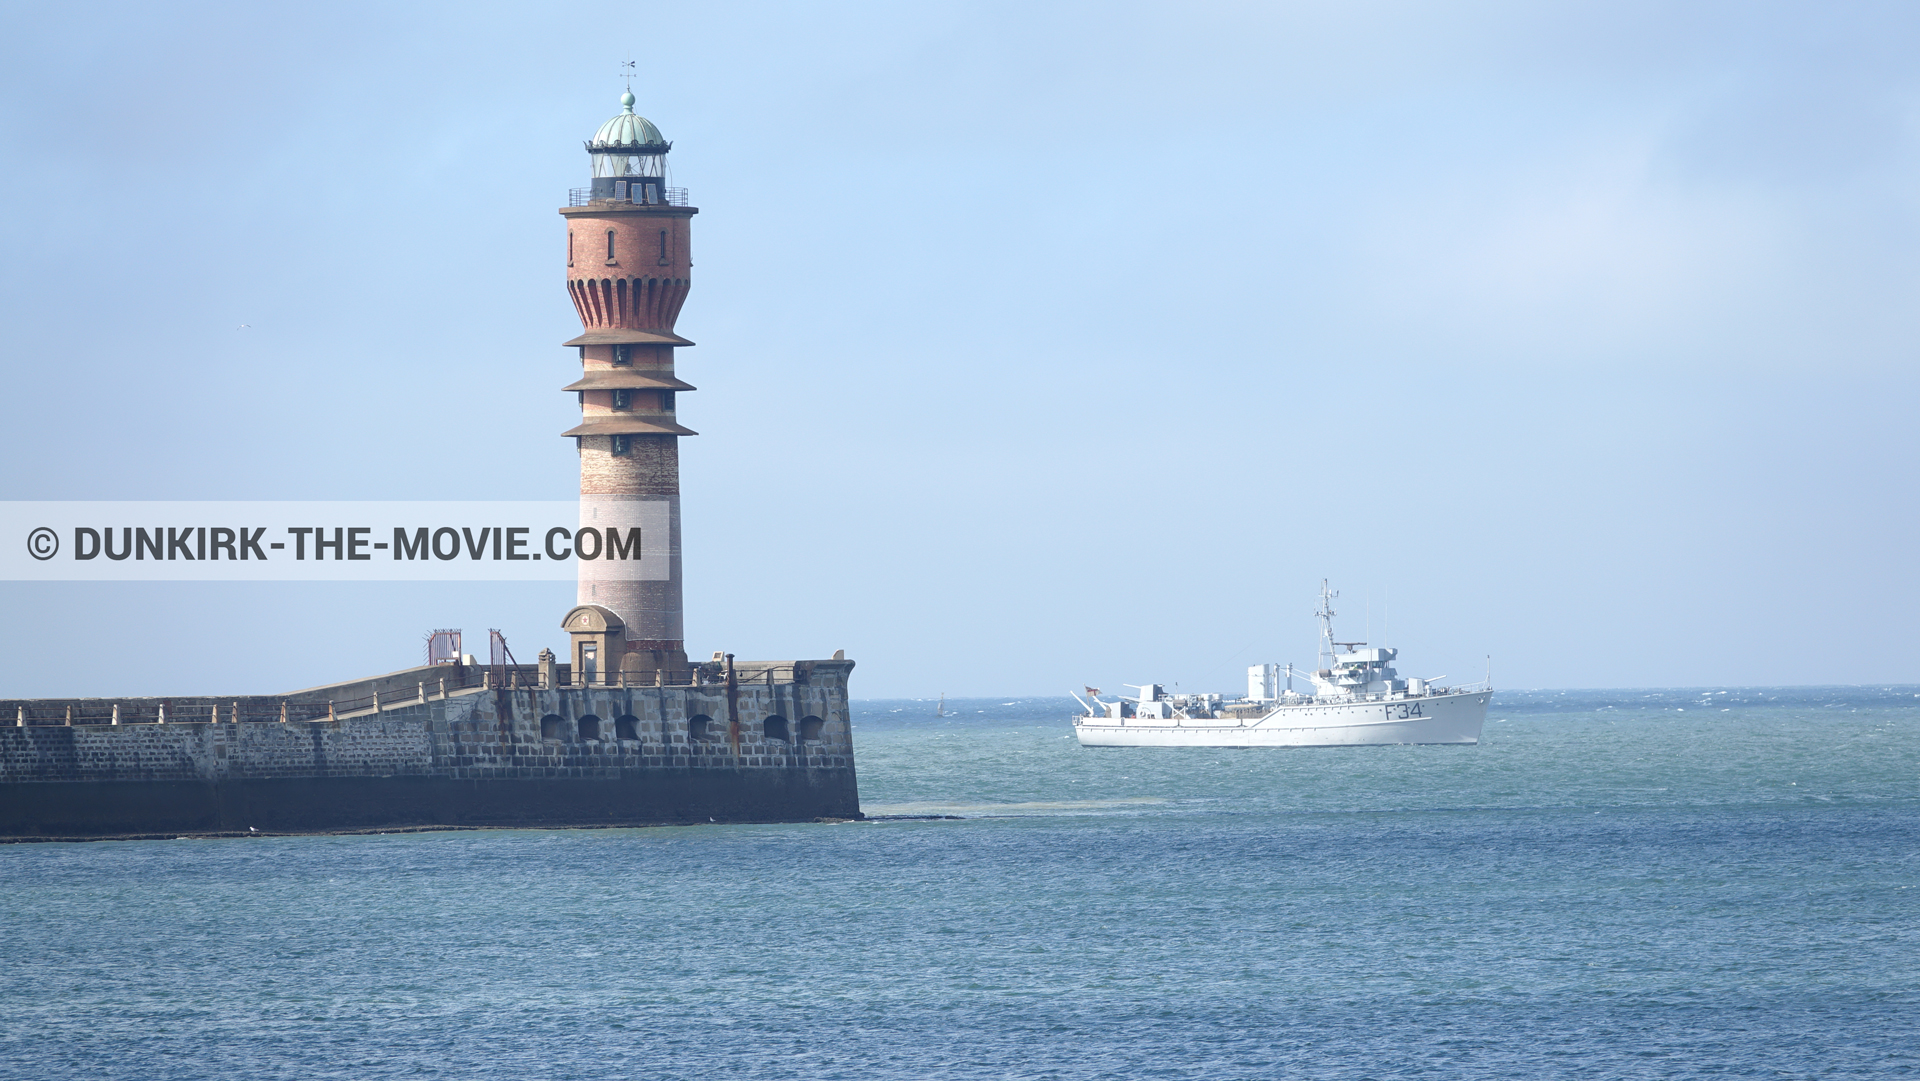 Picture with blue sky, F34 - Hr.Ms. Sittard, calm sea, St Pol sur Mer lighthouse,  from behind the scene of the Dunkirk movie by Nolan